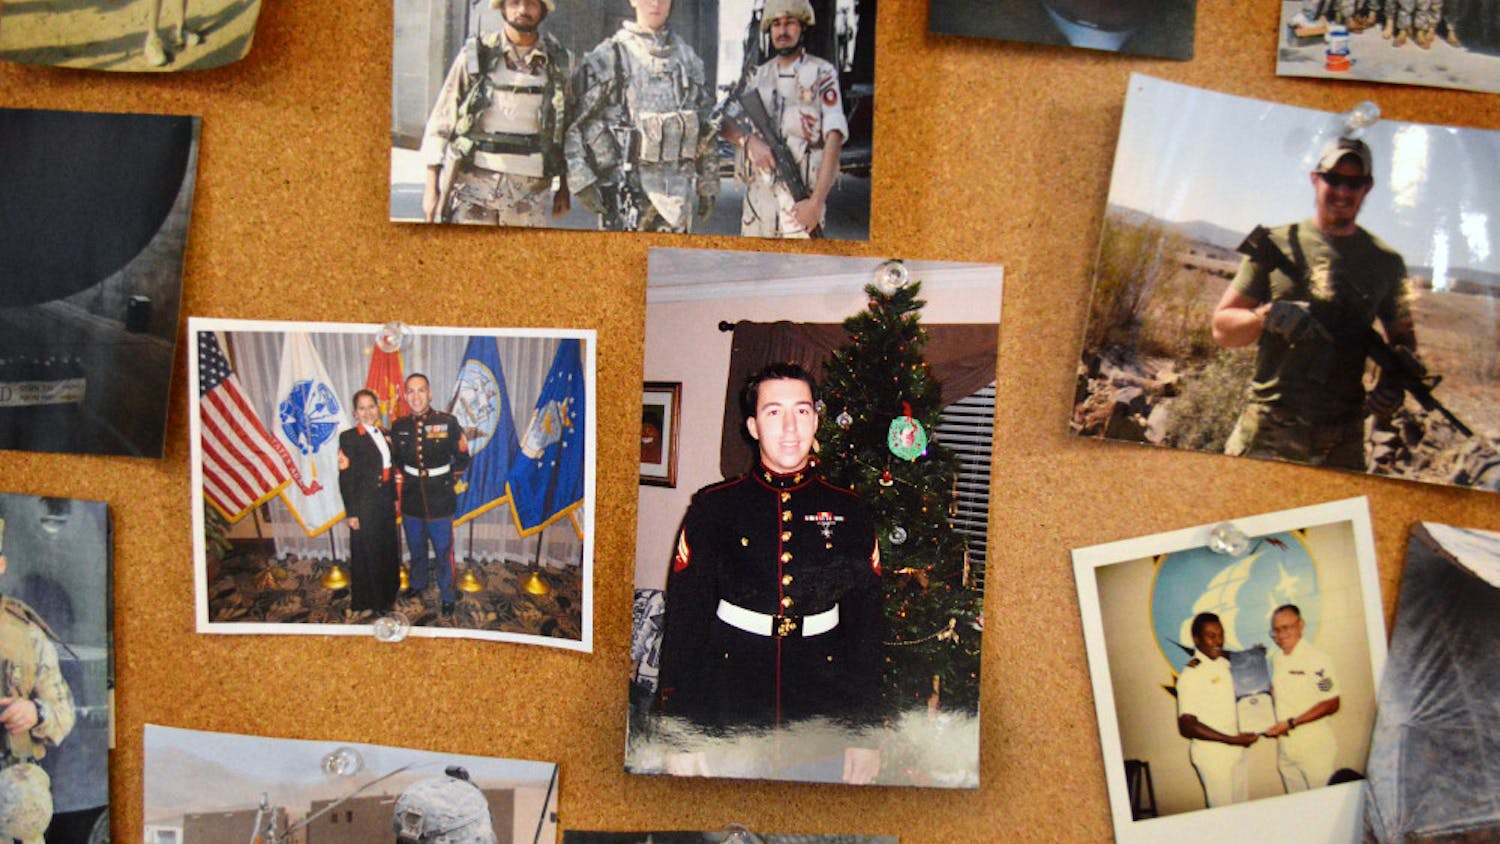 Photographs of members in uniform and in the field are displayed on the walls of the Collegiate Veterans Success Center.